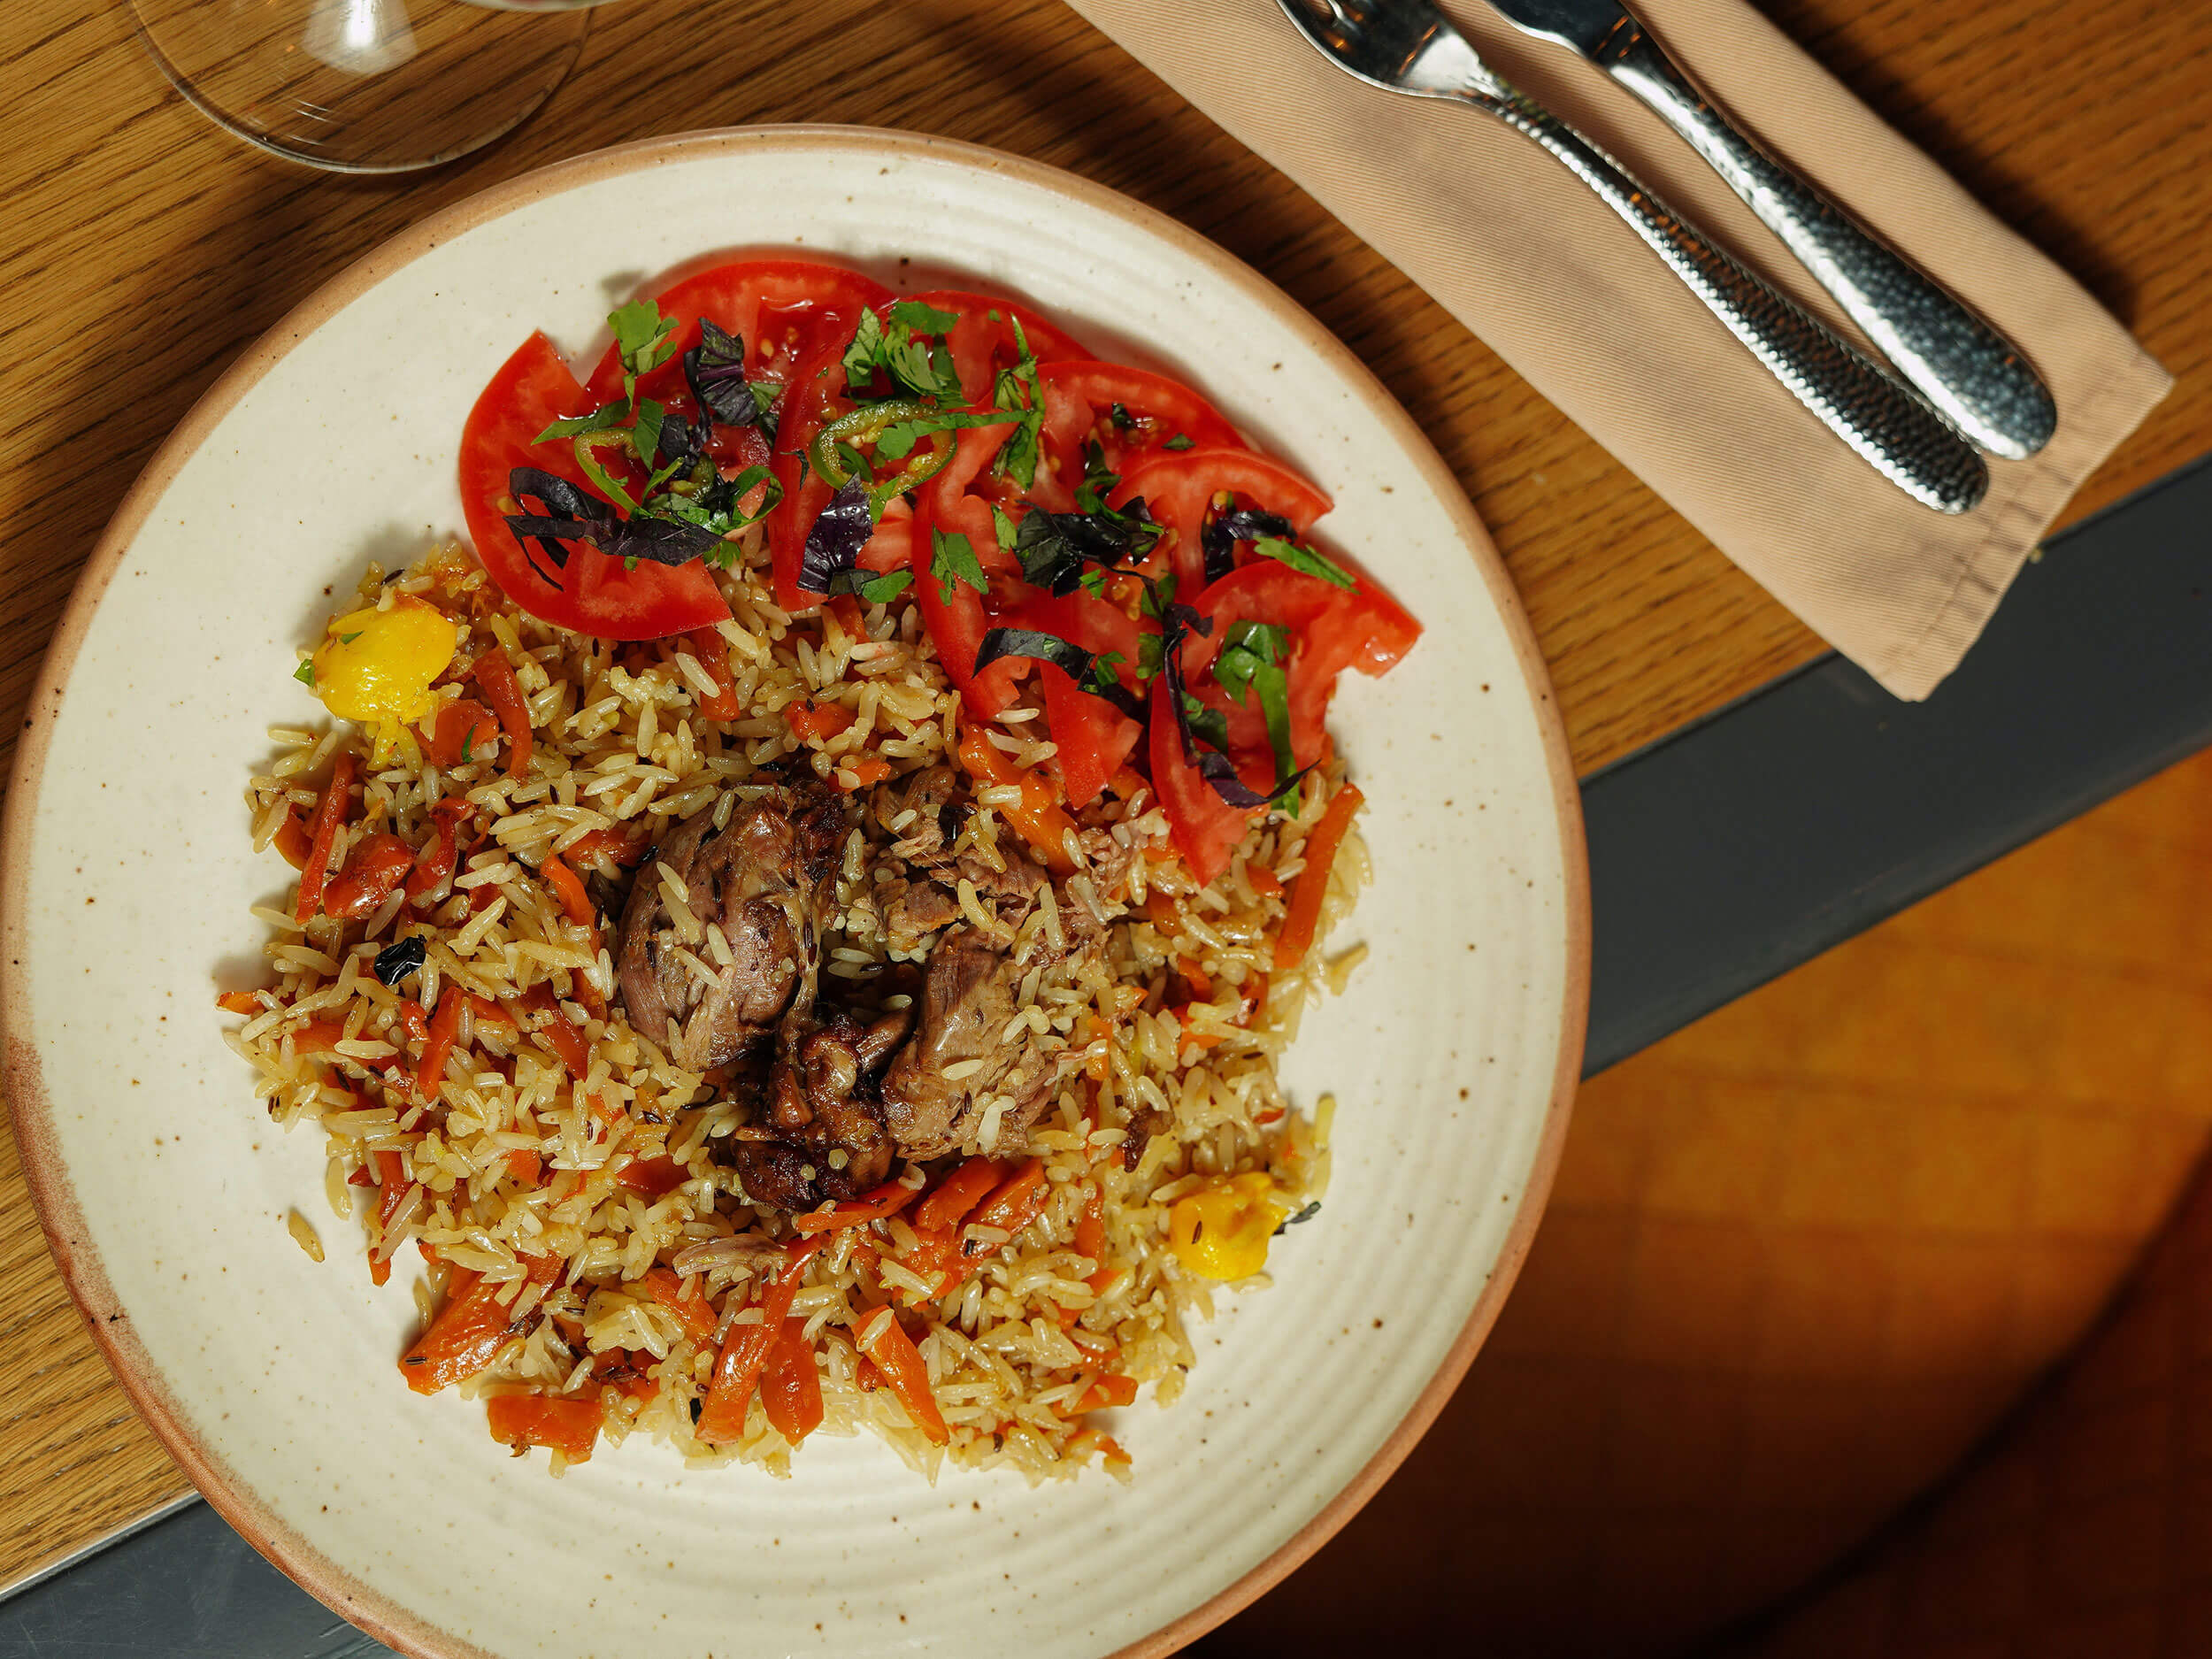 Plate with oriental rice dish with various herbs, meat and vegetables on a table